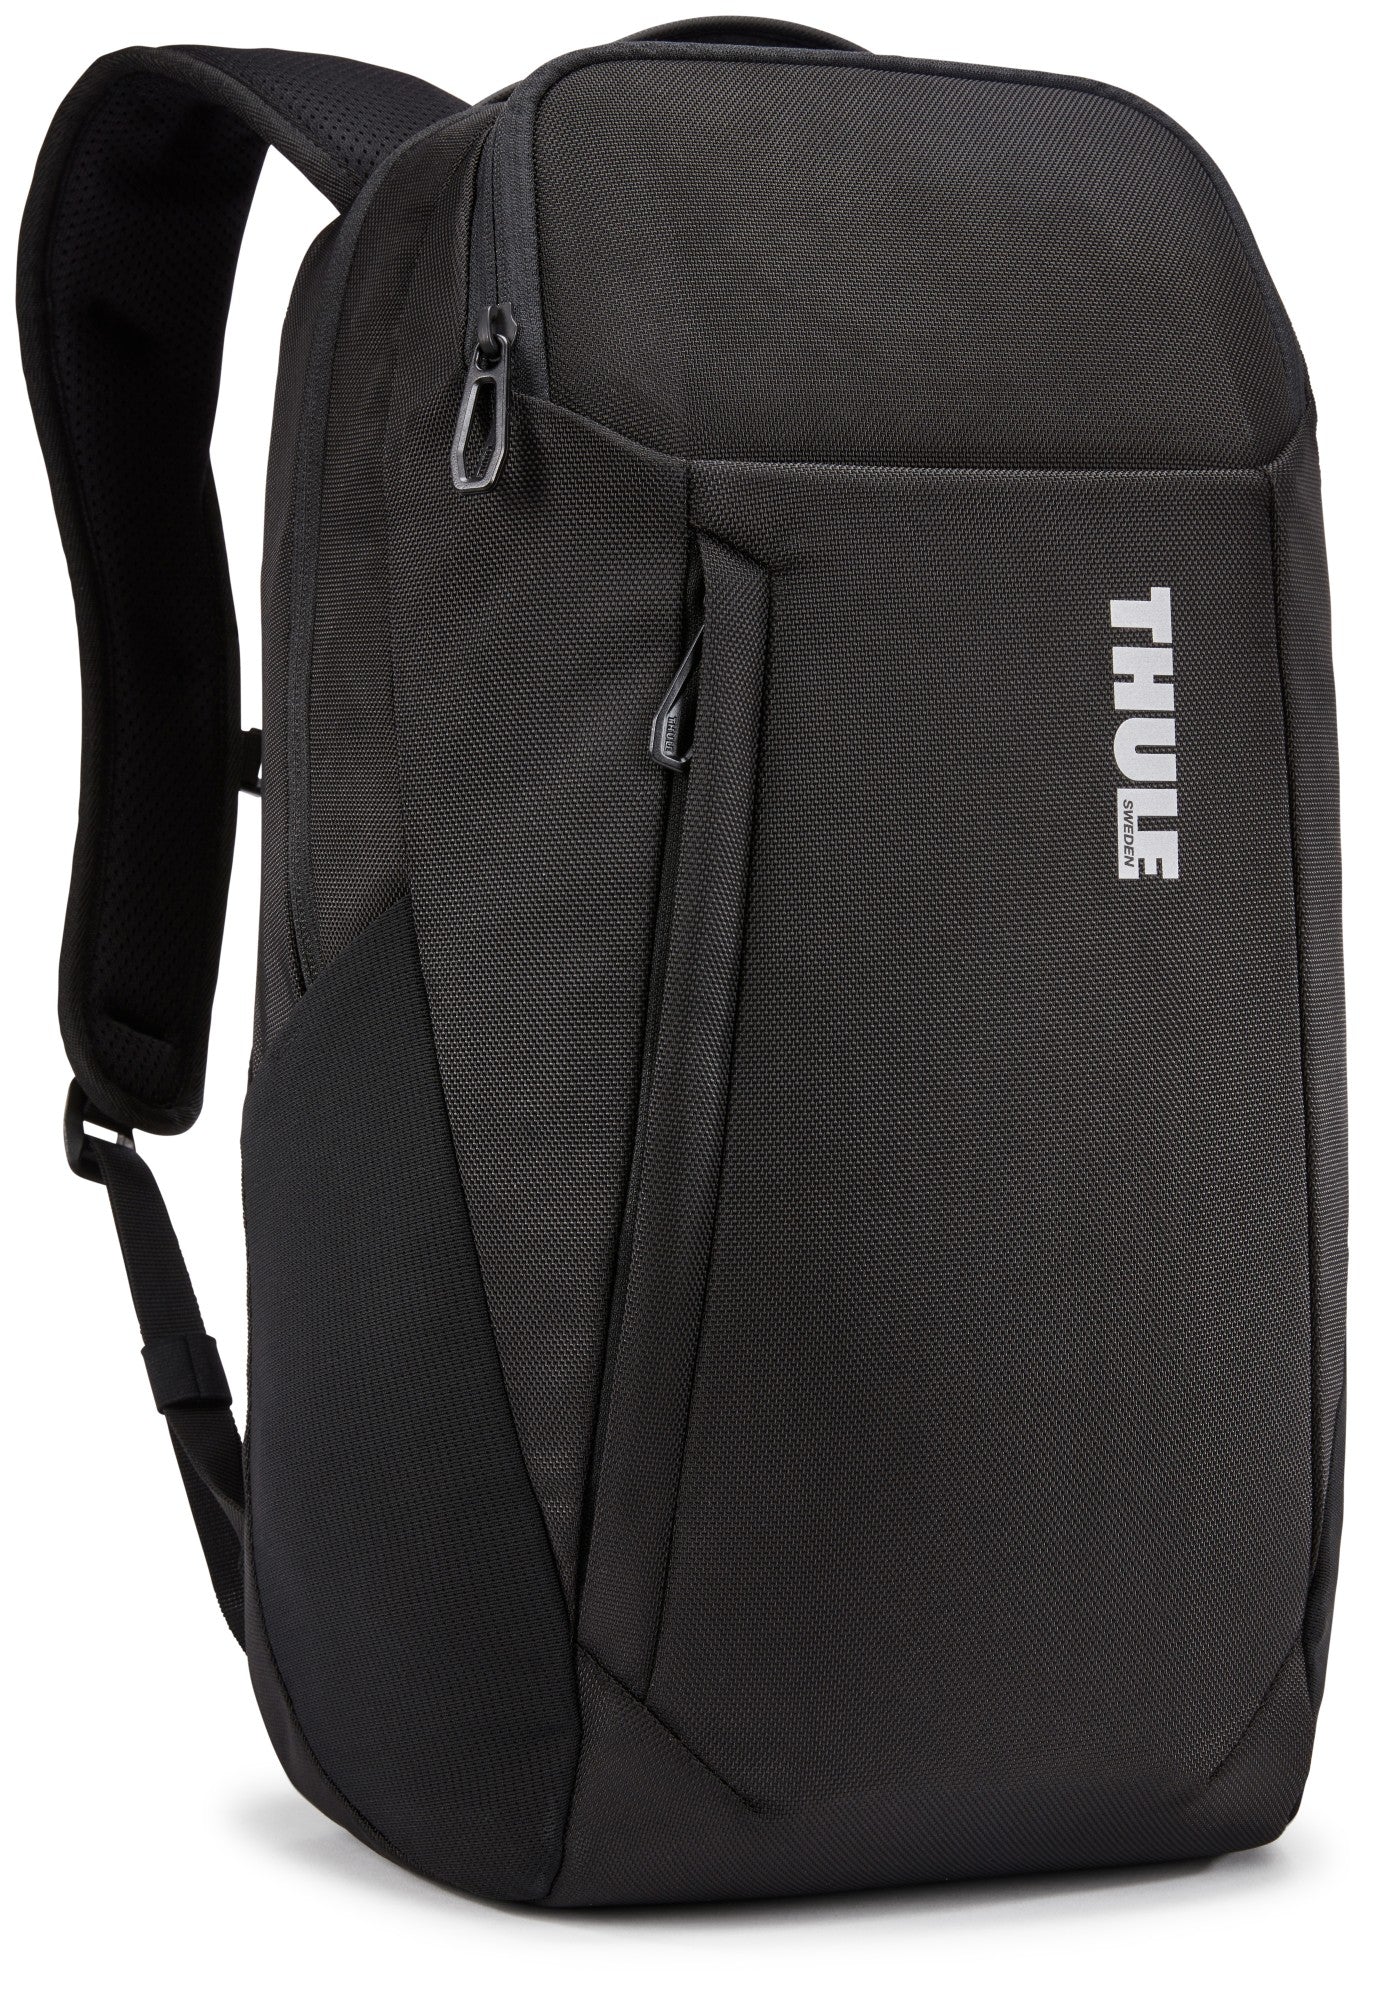 Thule Accent TACBP2115 - Black backpack Travel backpack Recycled polyester